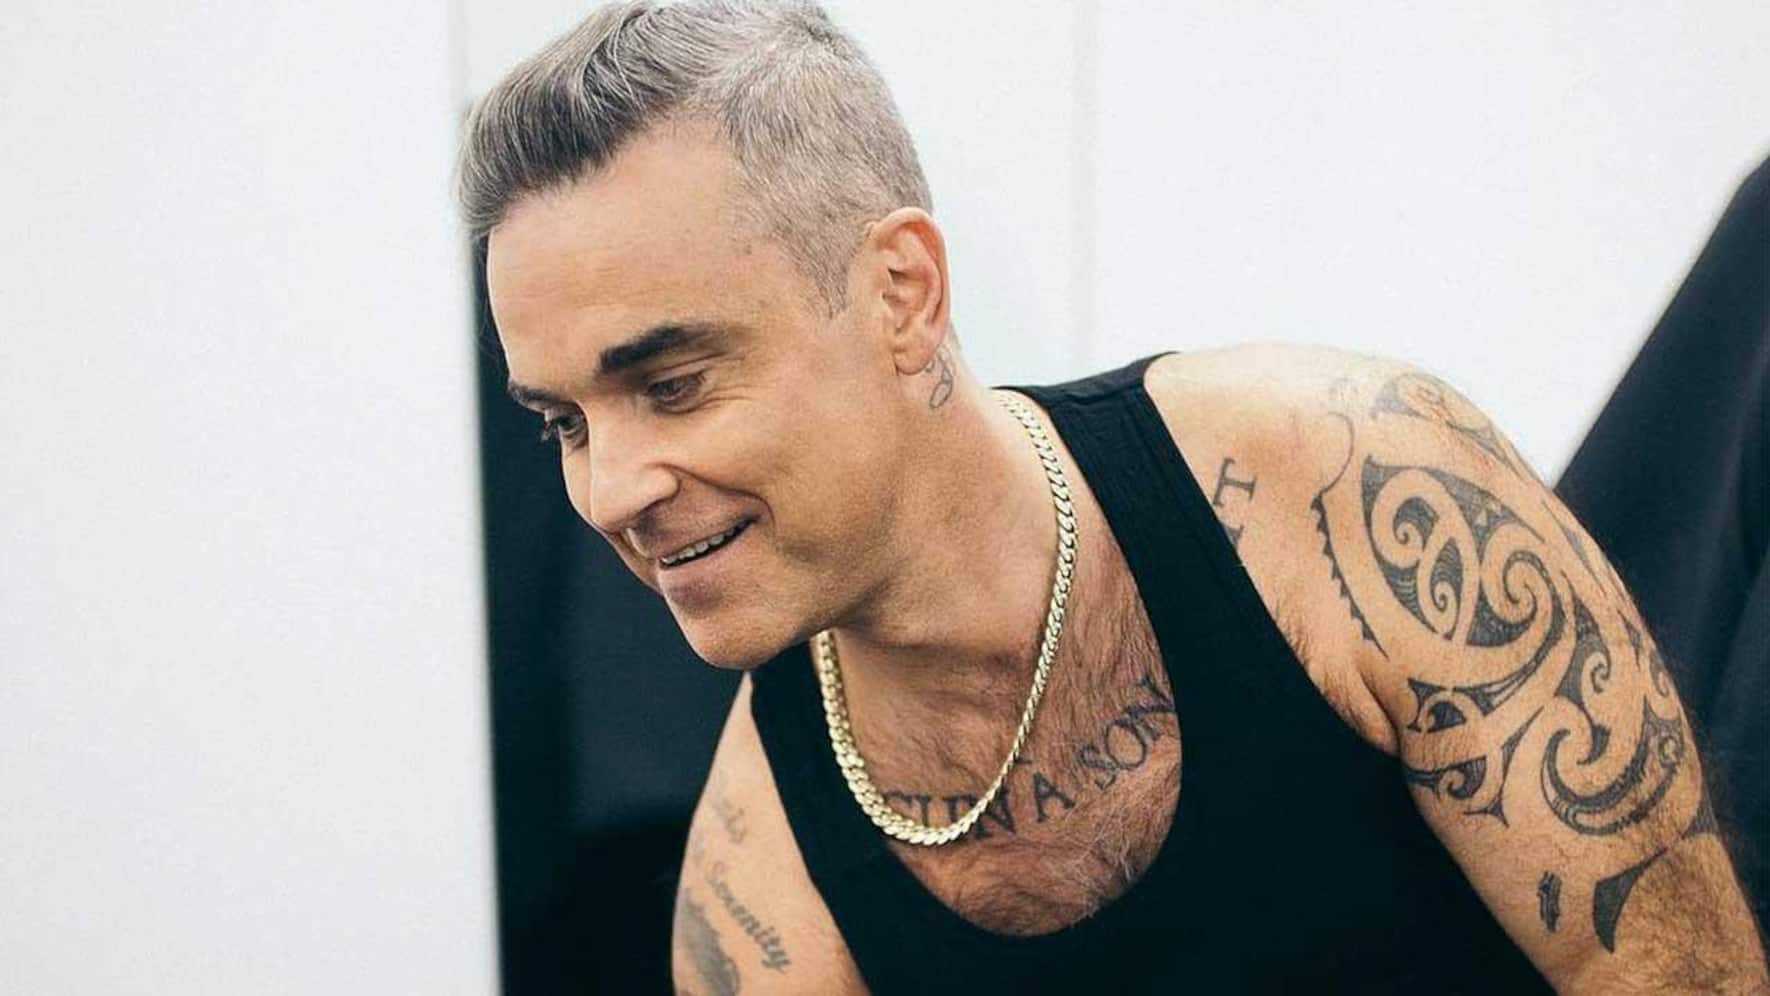 Robbie Williams claims to have slept with over 100 women